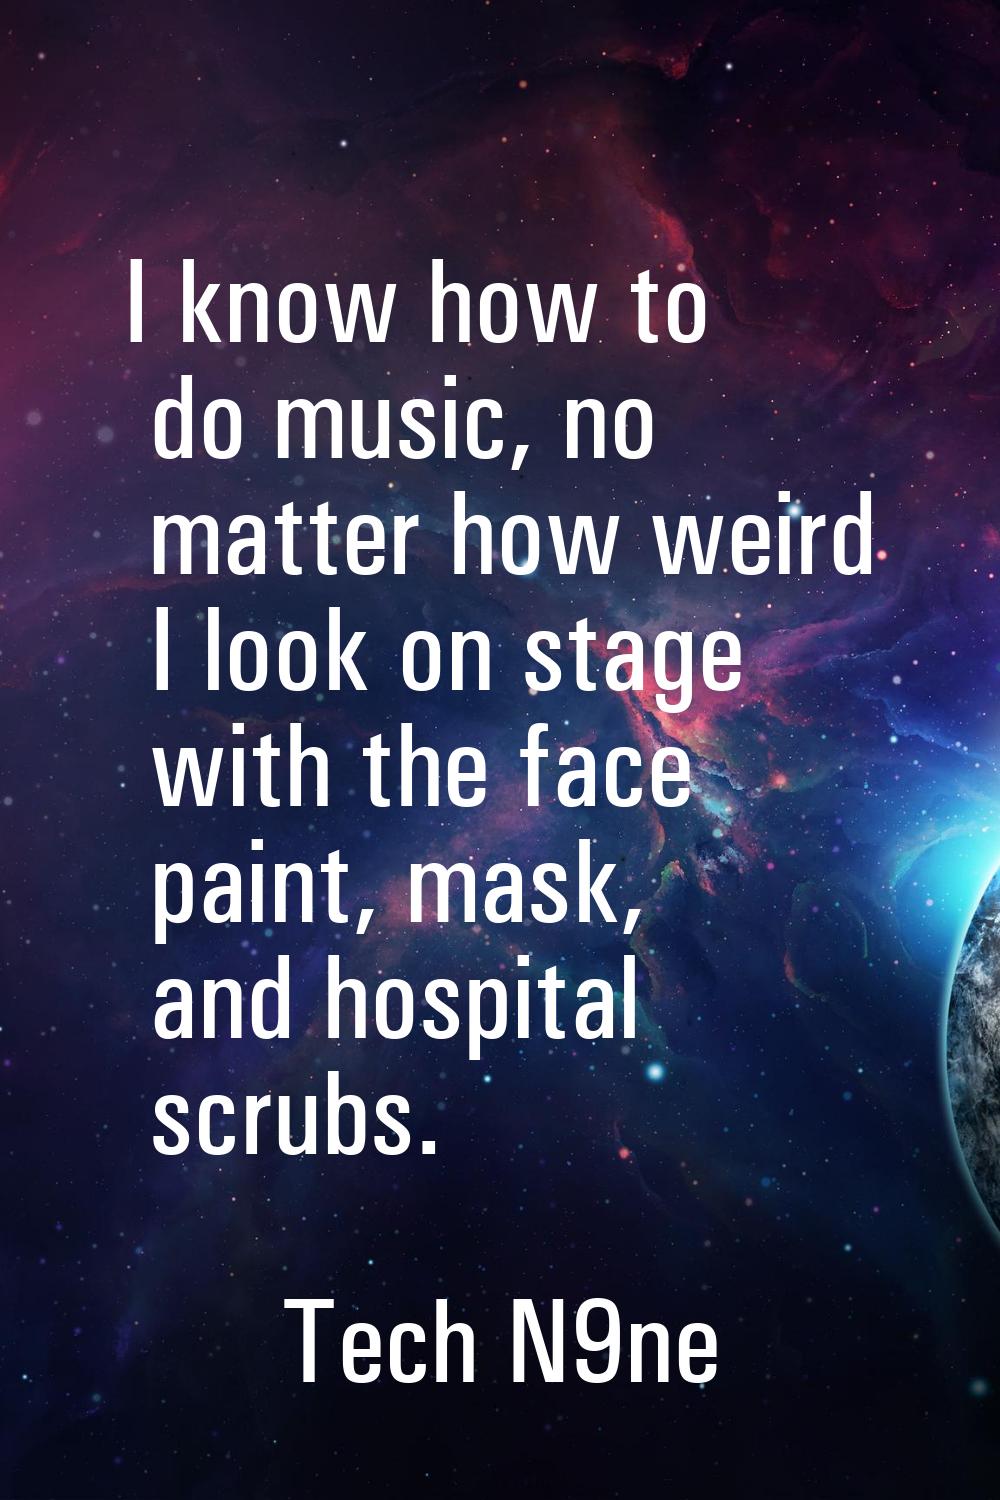 I know how to do music, no matter how weird I look on stage with the face paint, mask, and hospital